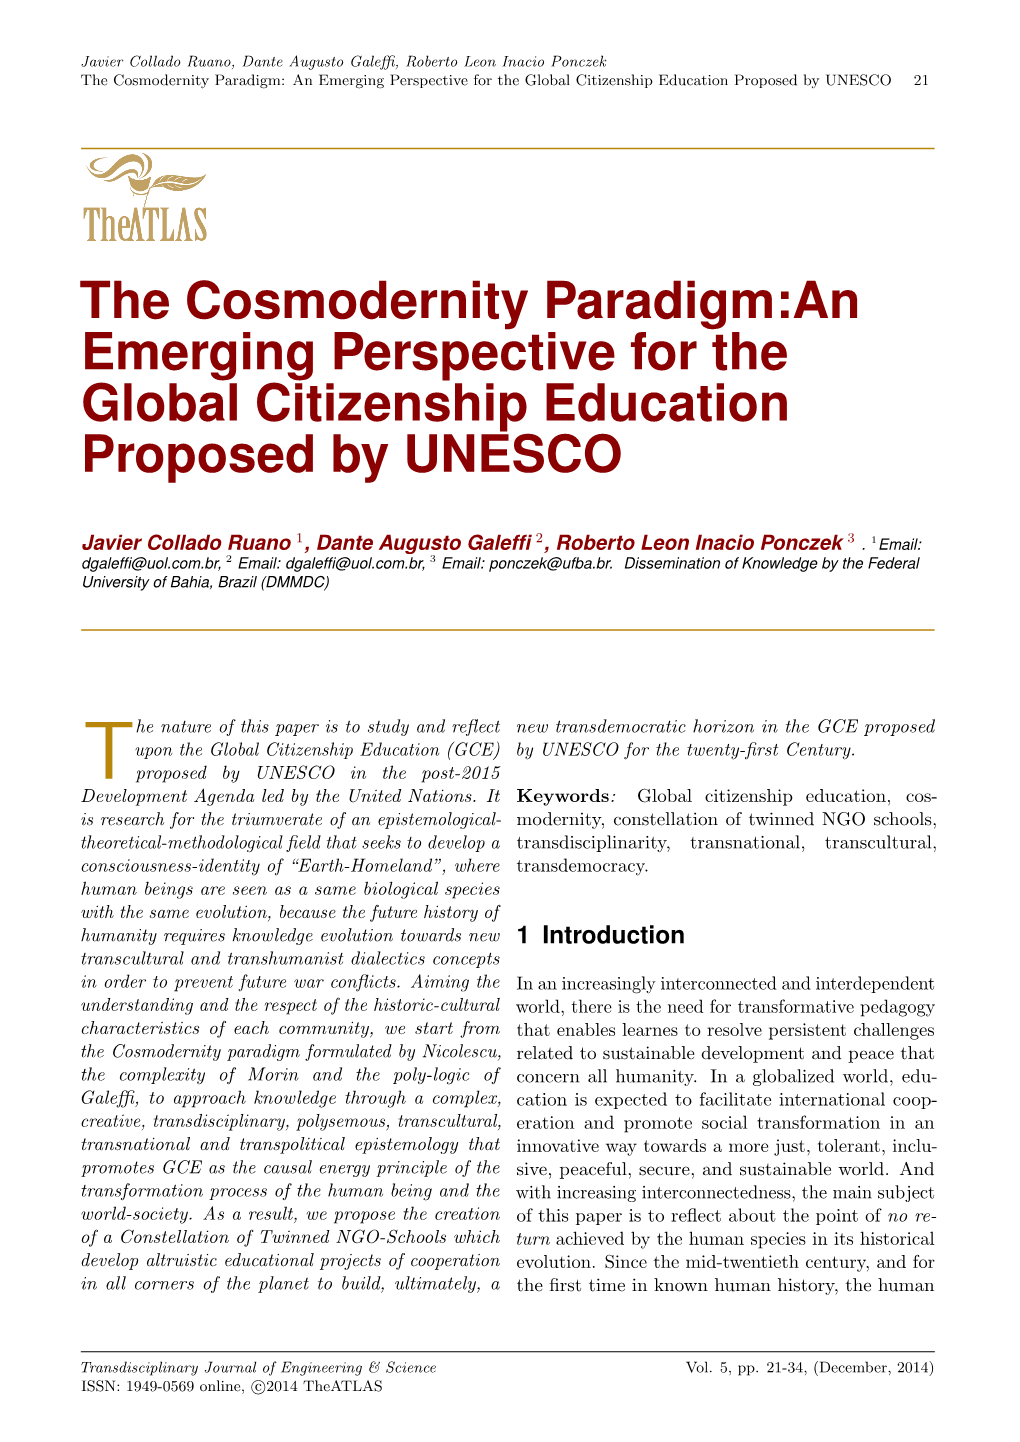 The Cosmodernity Paradigm: an Emerging Perspective for the Global Citizenship Education Proposed by UNESCO 21